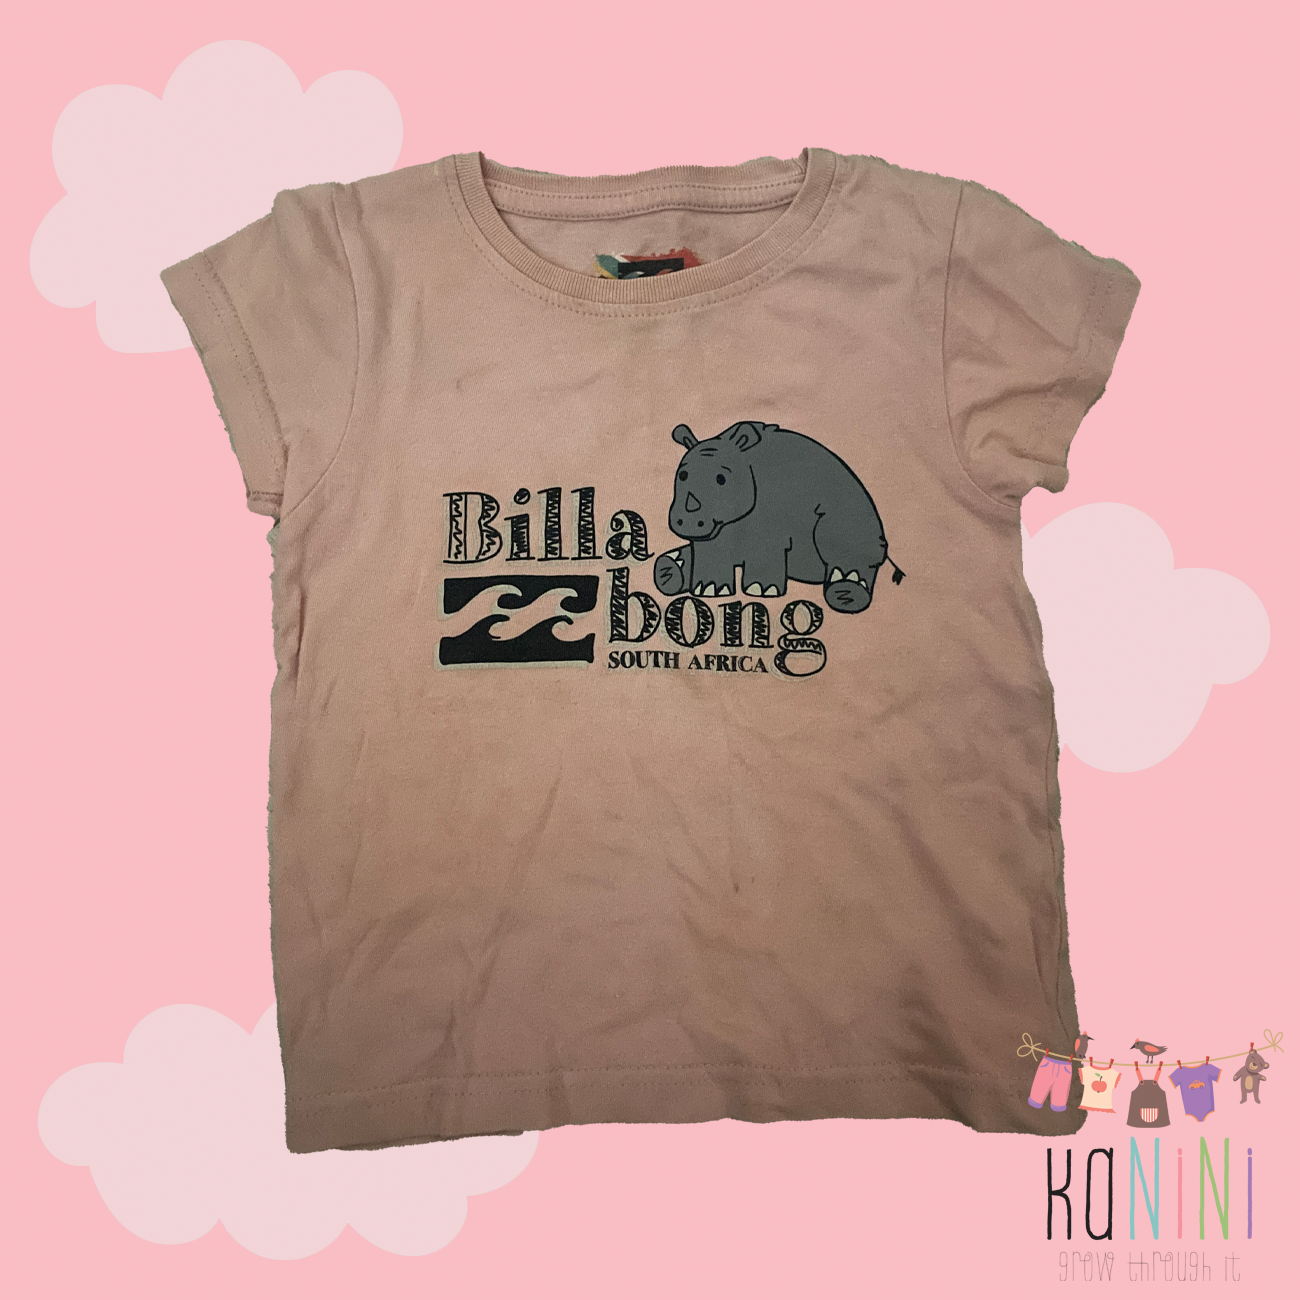 Featured image for “Billabong 2 Years Girls Pink T-Shirt”